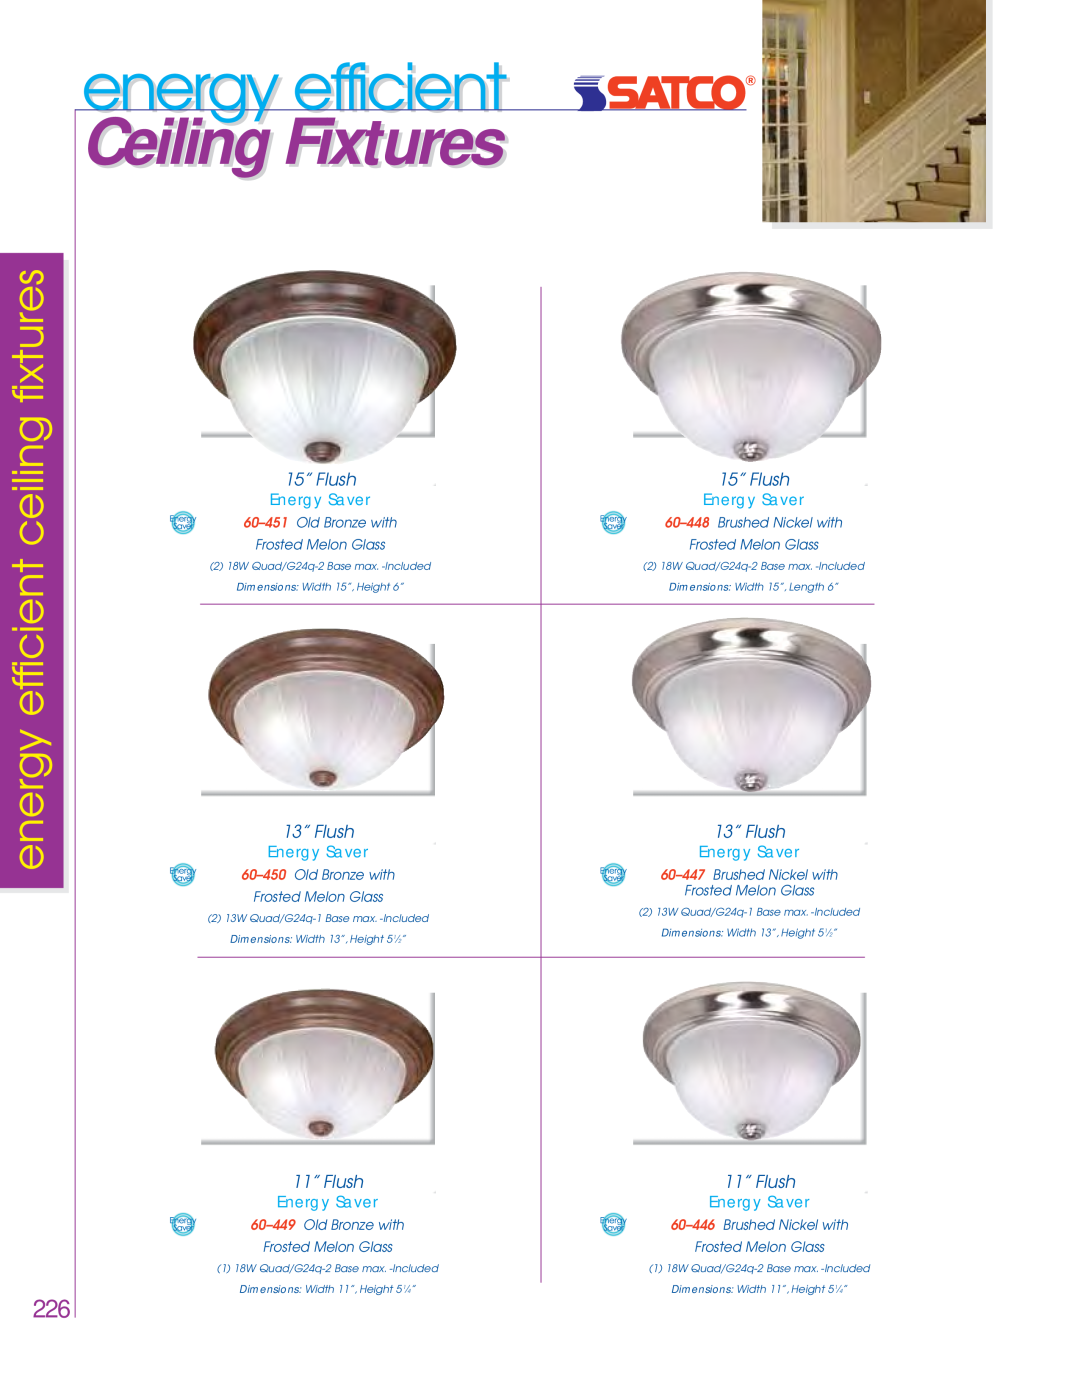 Satco Products 76-693, 76-694 Ceiling Fixtures, energy efficient ceiling fixtures, 15” Flush, 13” Flush, 11” Flush 